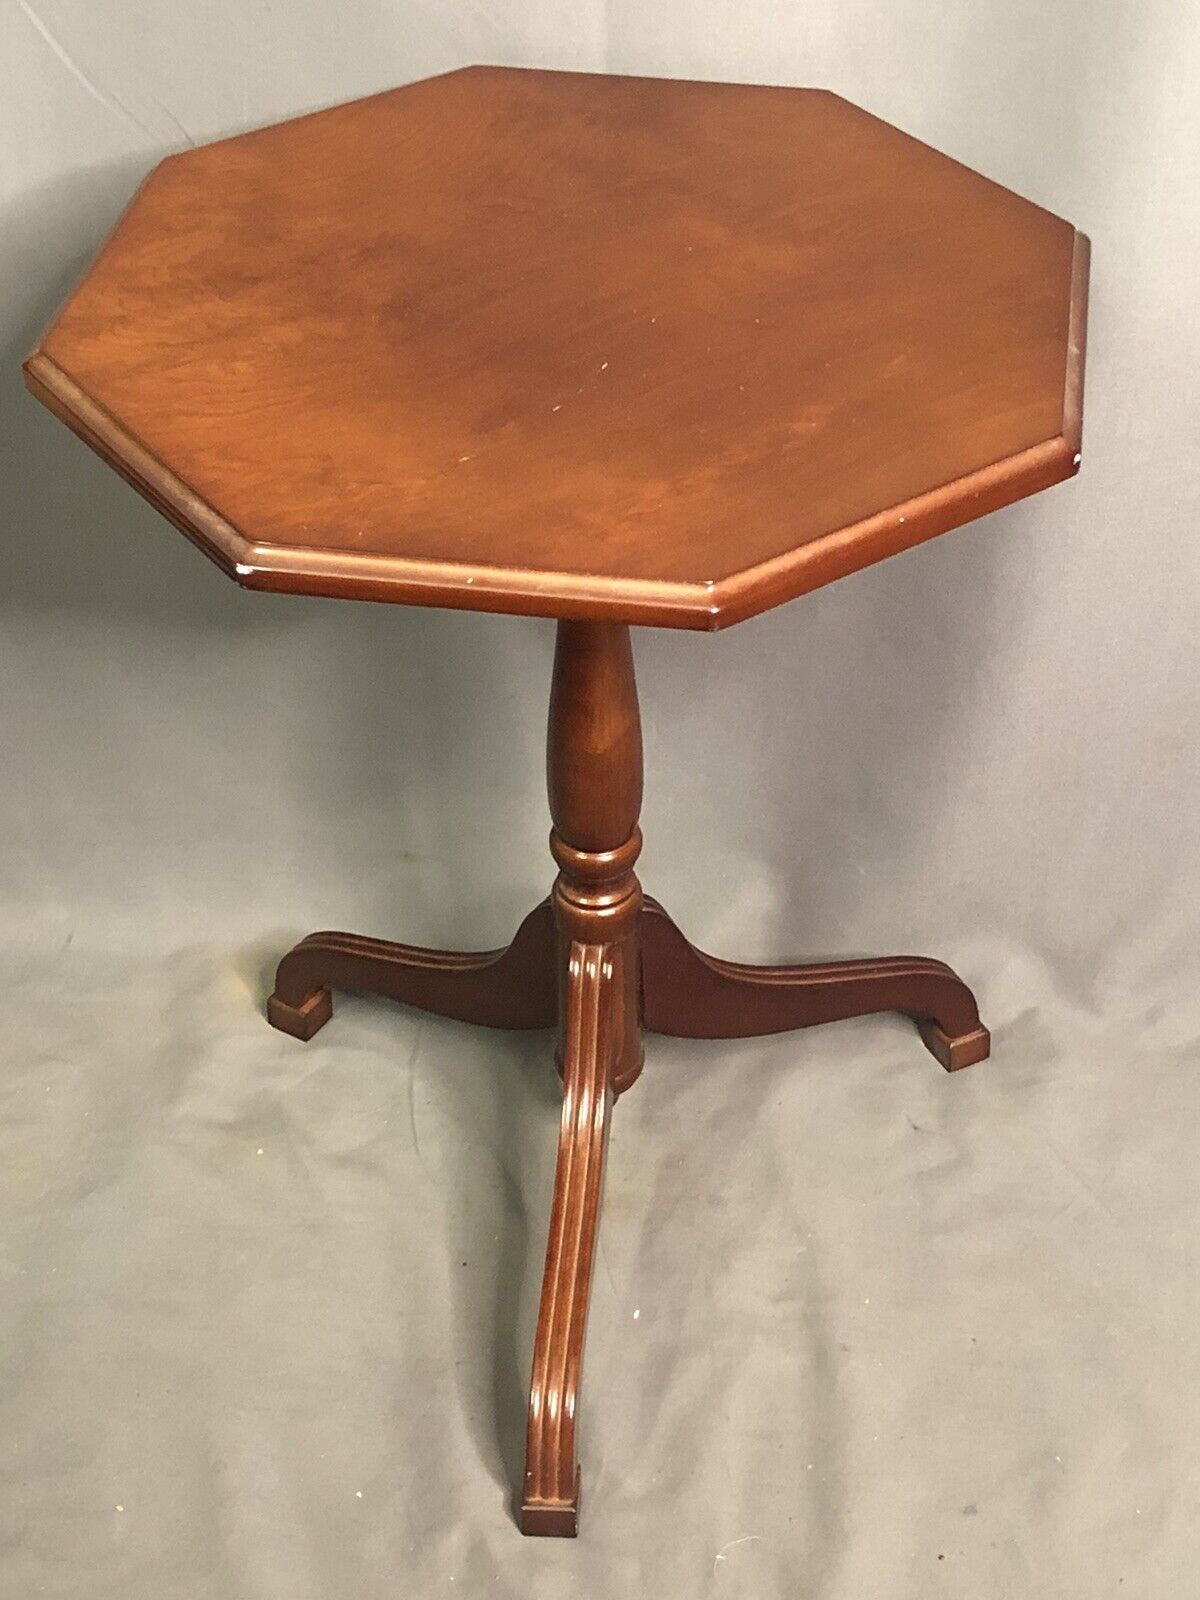 Bombay Company Pedestal Table Plant Stand Vintage Side Tulip Table 3 Leg Display